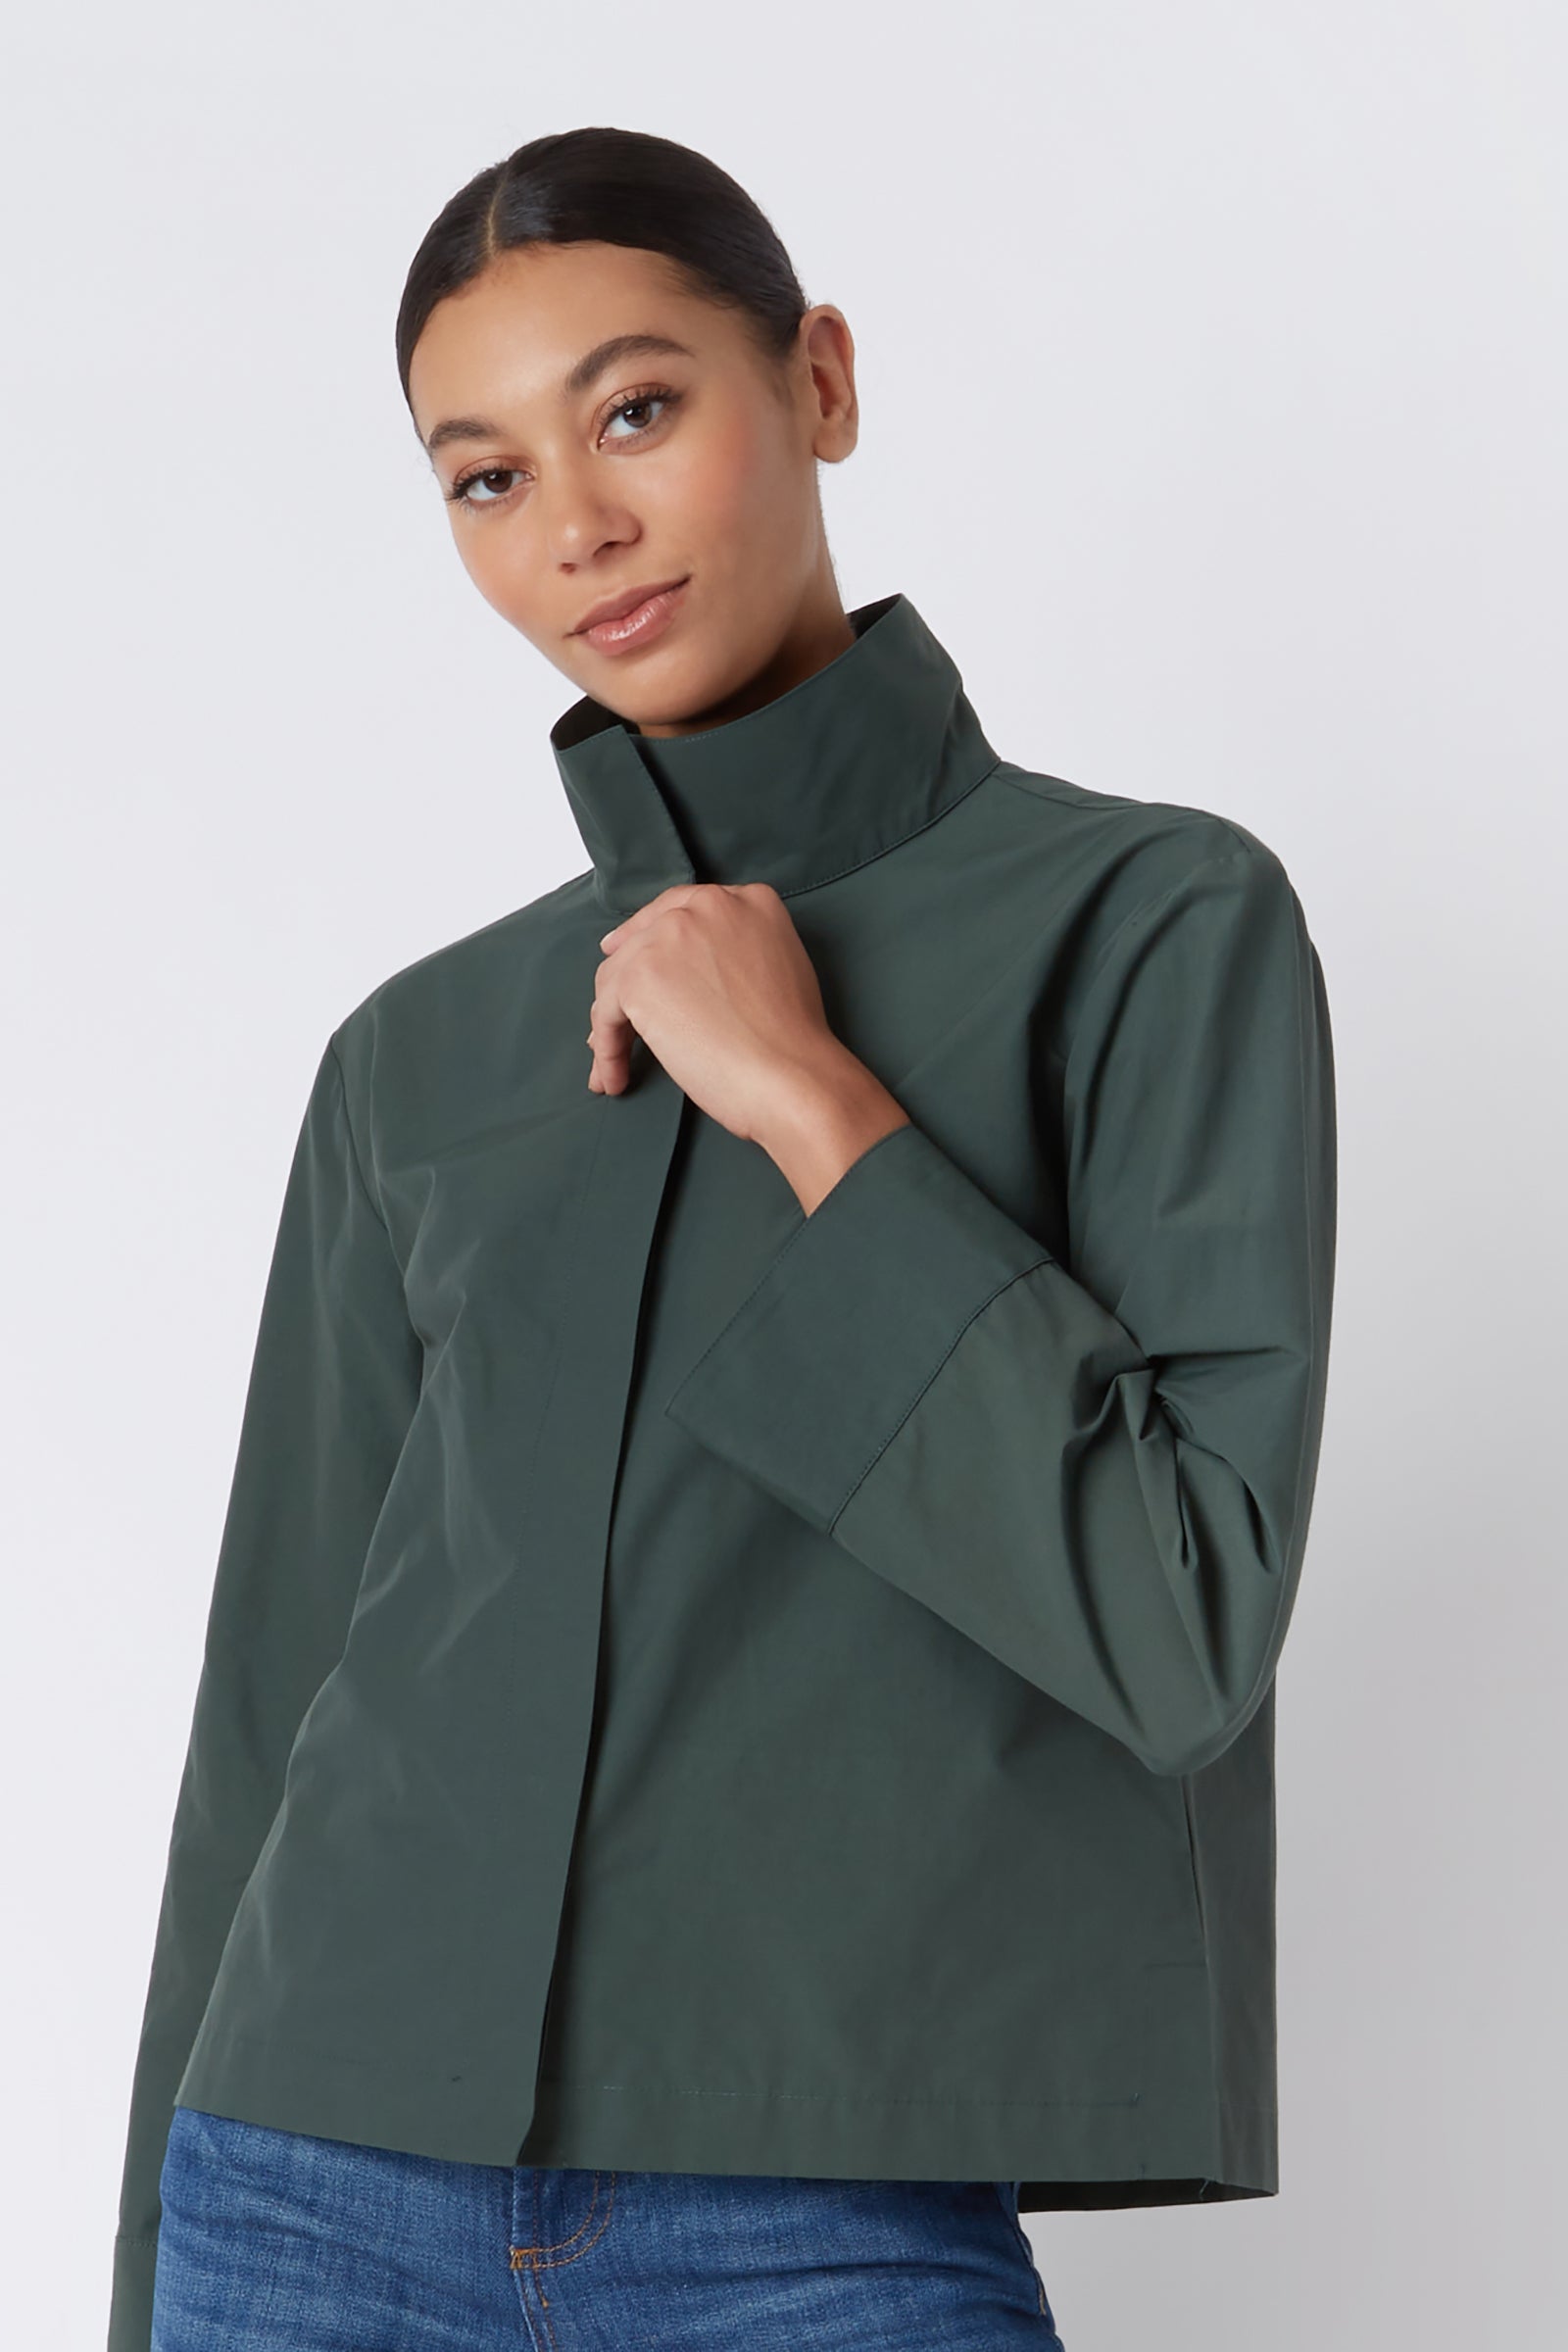 Kal Rieman Peggy Collared Shirt in Loden Broadcloth on Model Main Cropped Front View